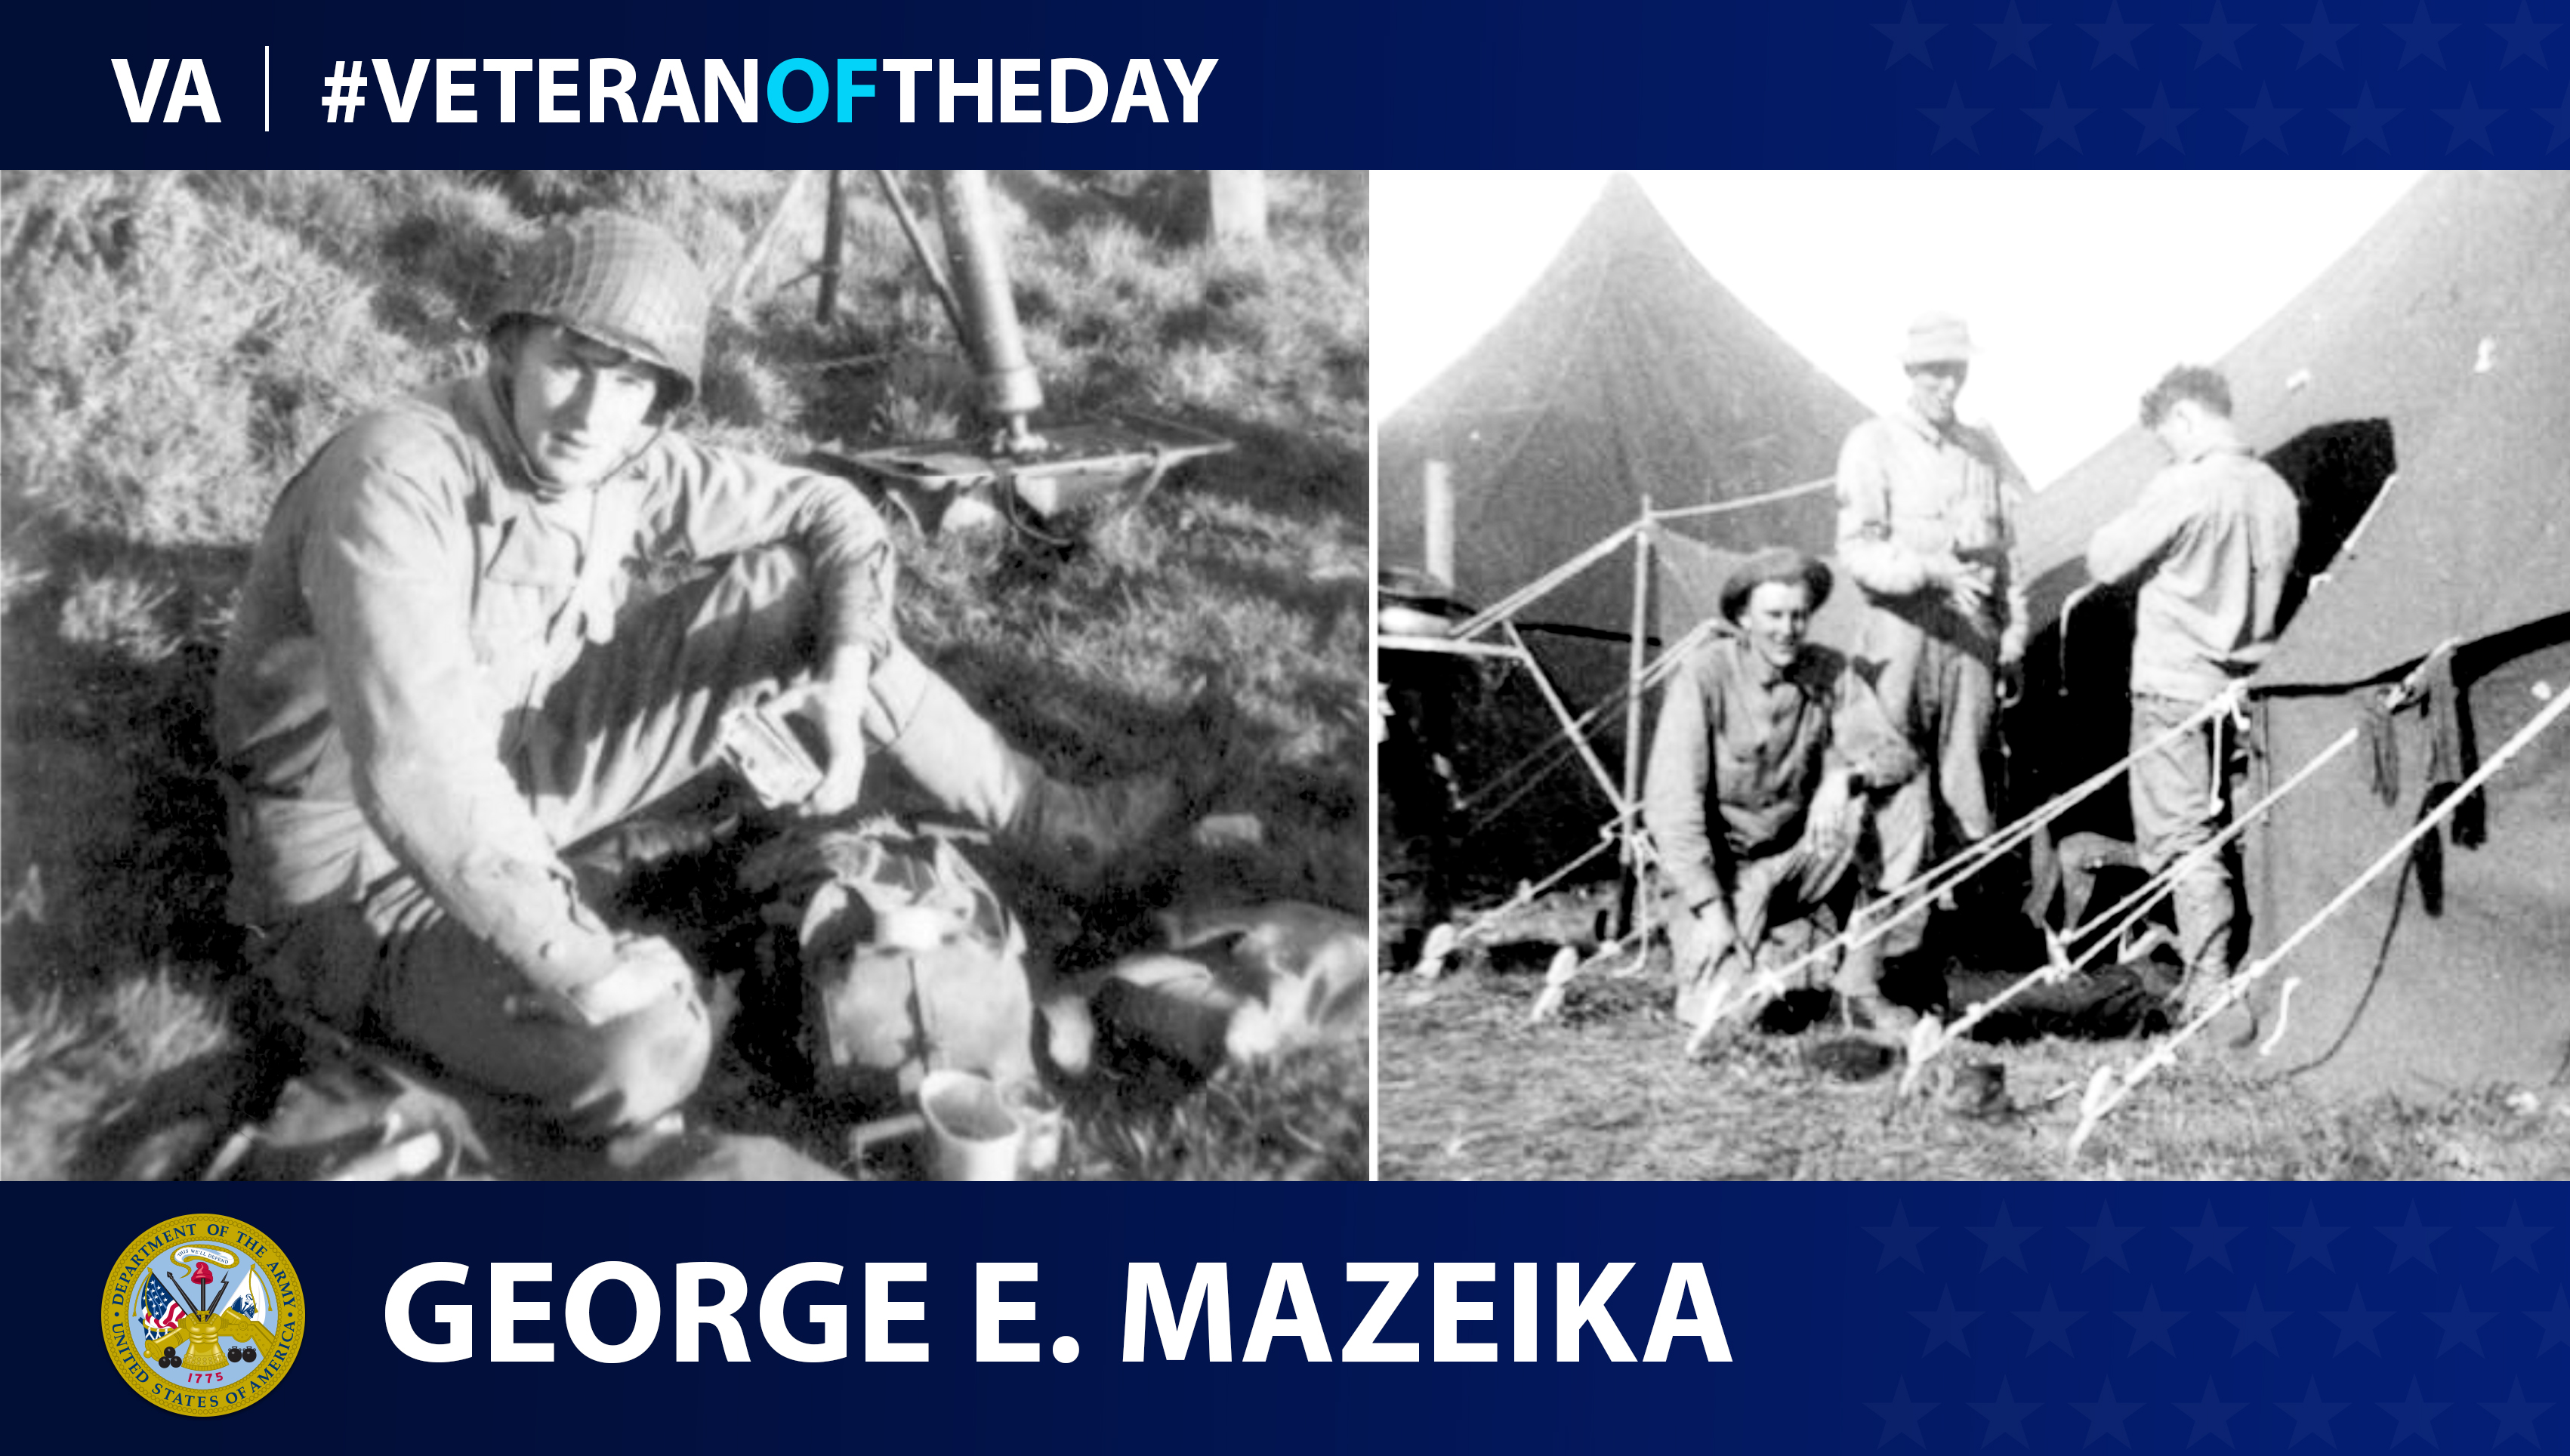 Army Veteran George E. Mazeika is today's Veteran of the Day.